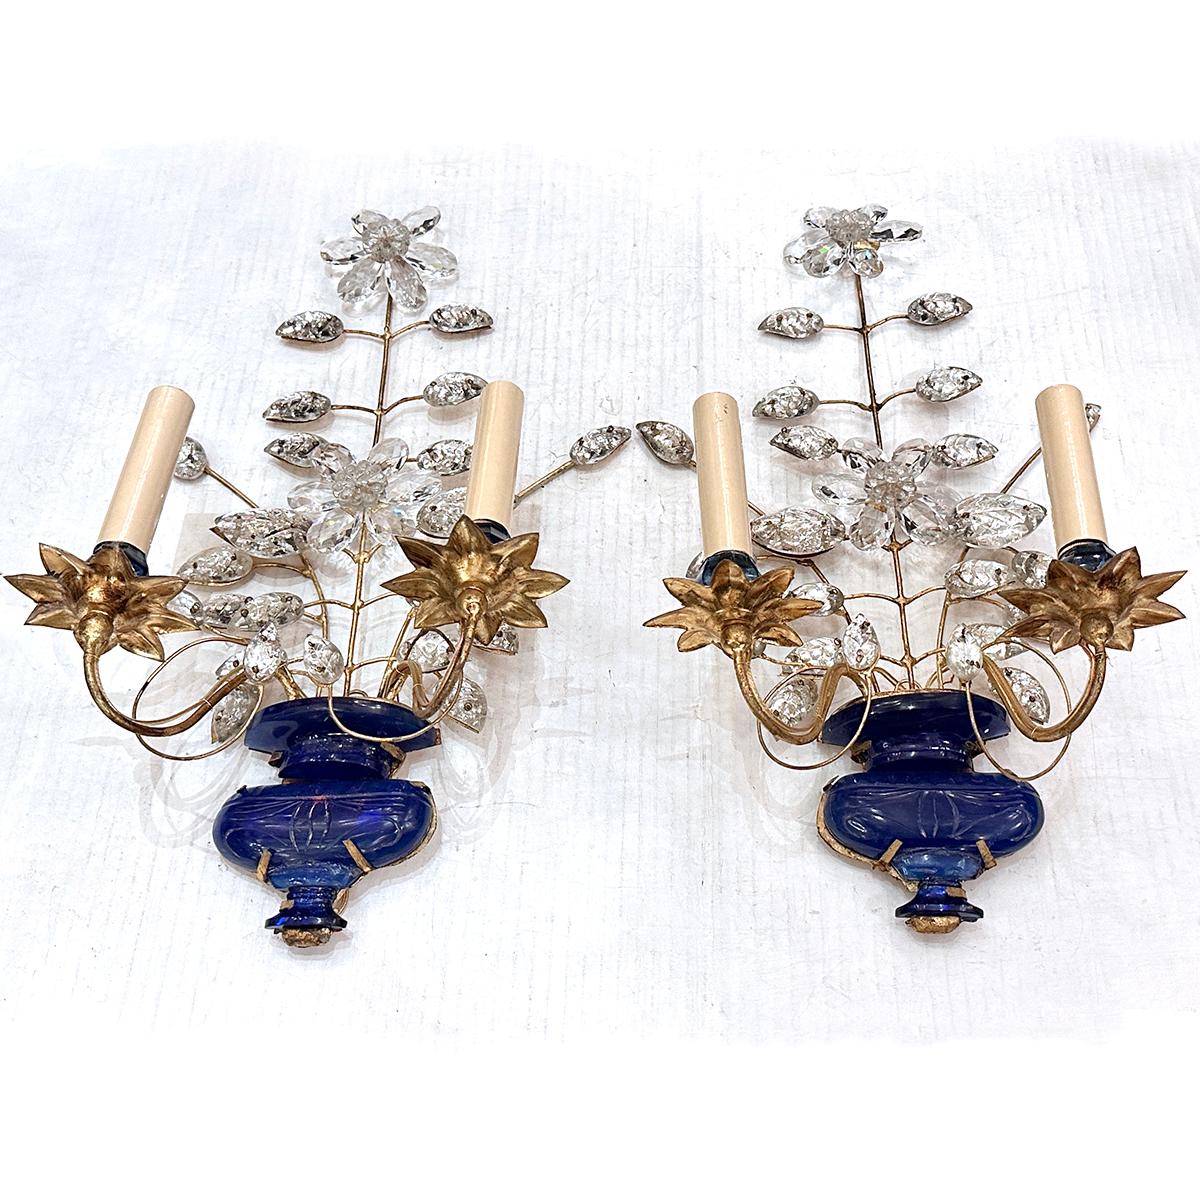 Pair of circa 1960's gilt sconces with blue molded glass body. 

Measurements:
Height: 18